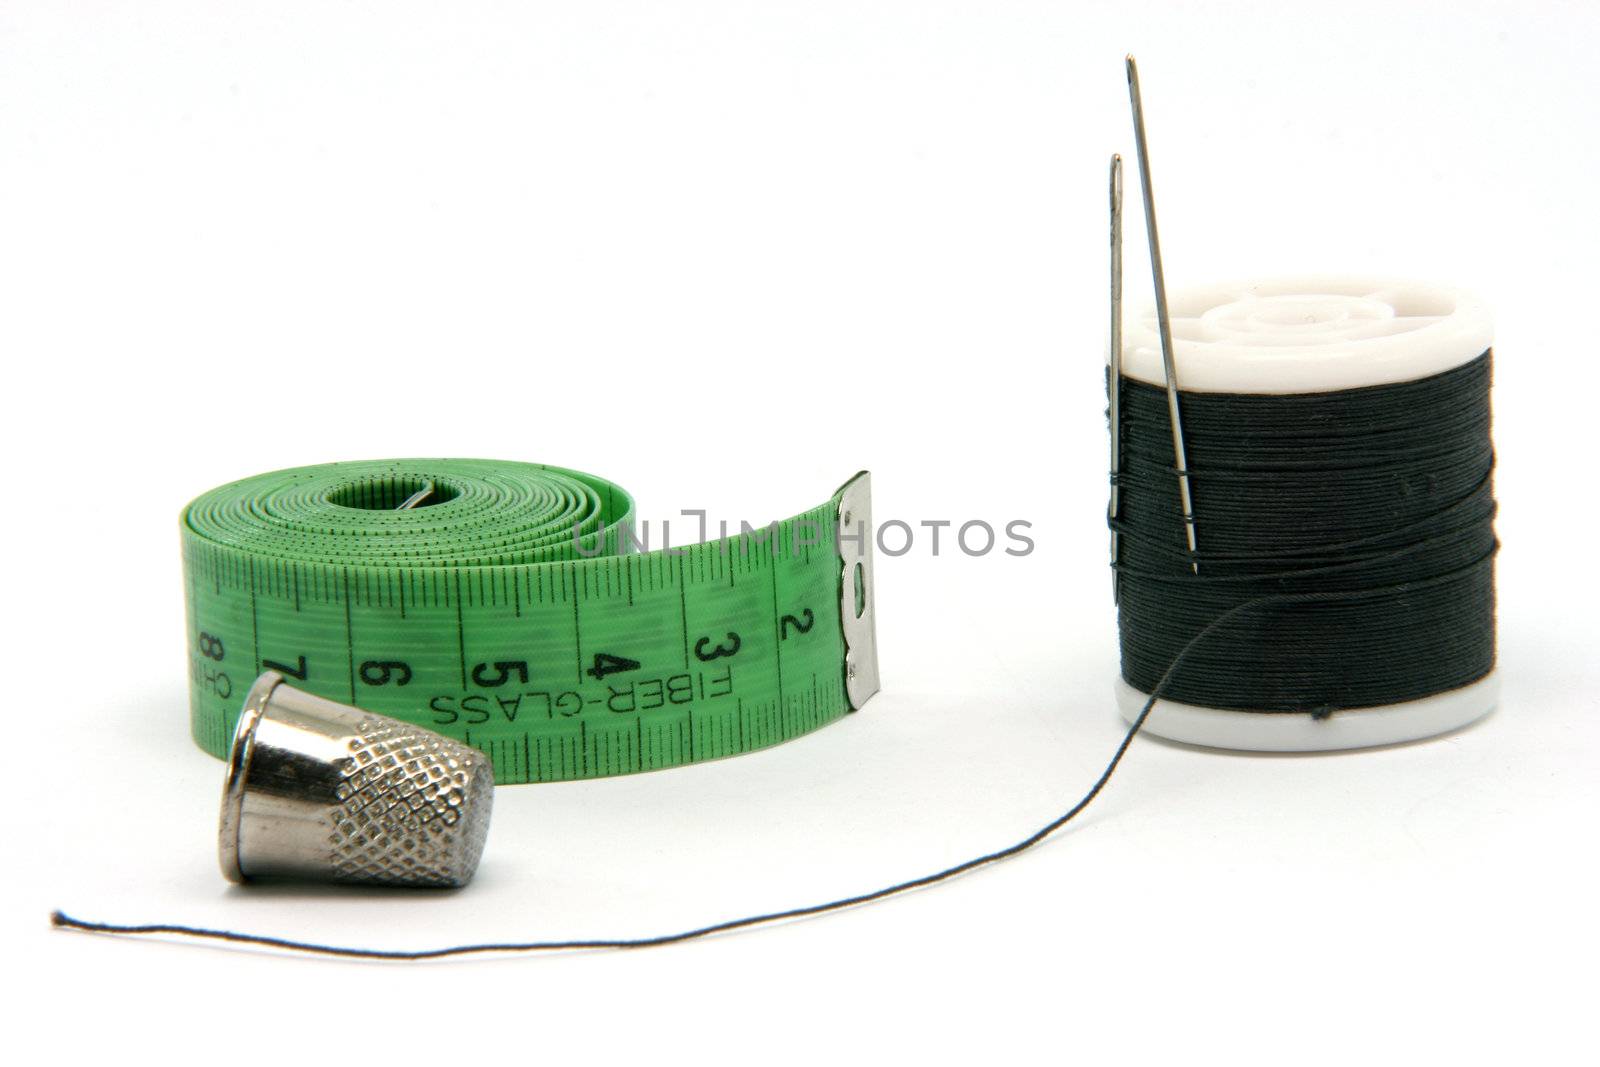 sewing items measure tape thread and thimble isolated on white background 